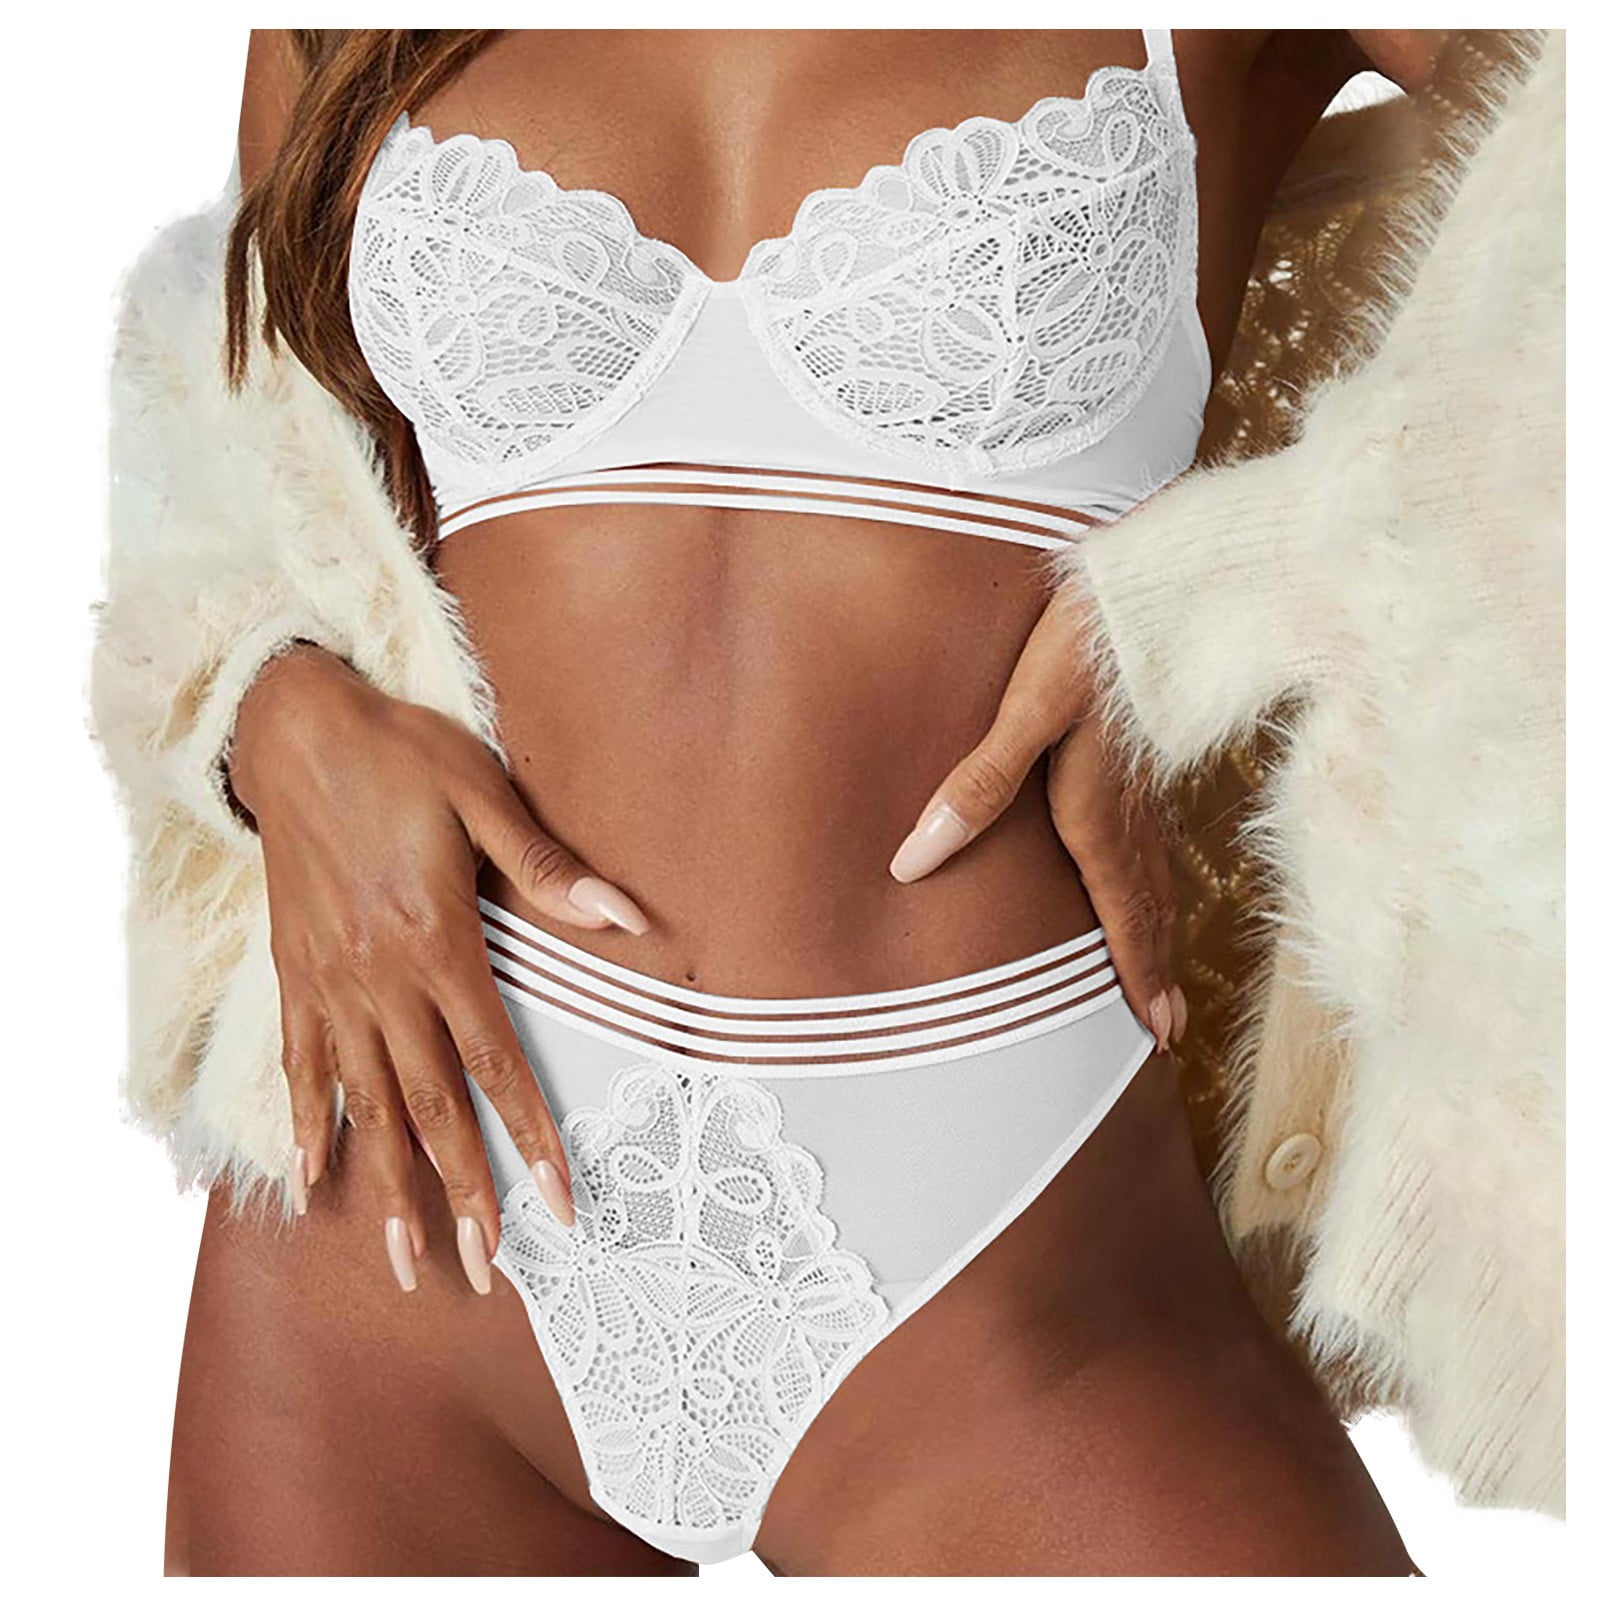 YDKZYMD White Sexy Bra and Panty Sets Mesh Plus Size High Waisted Lace Sexy Lingerie Set 2 Piece S